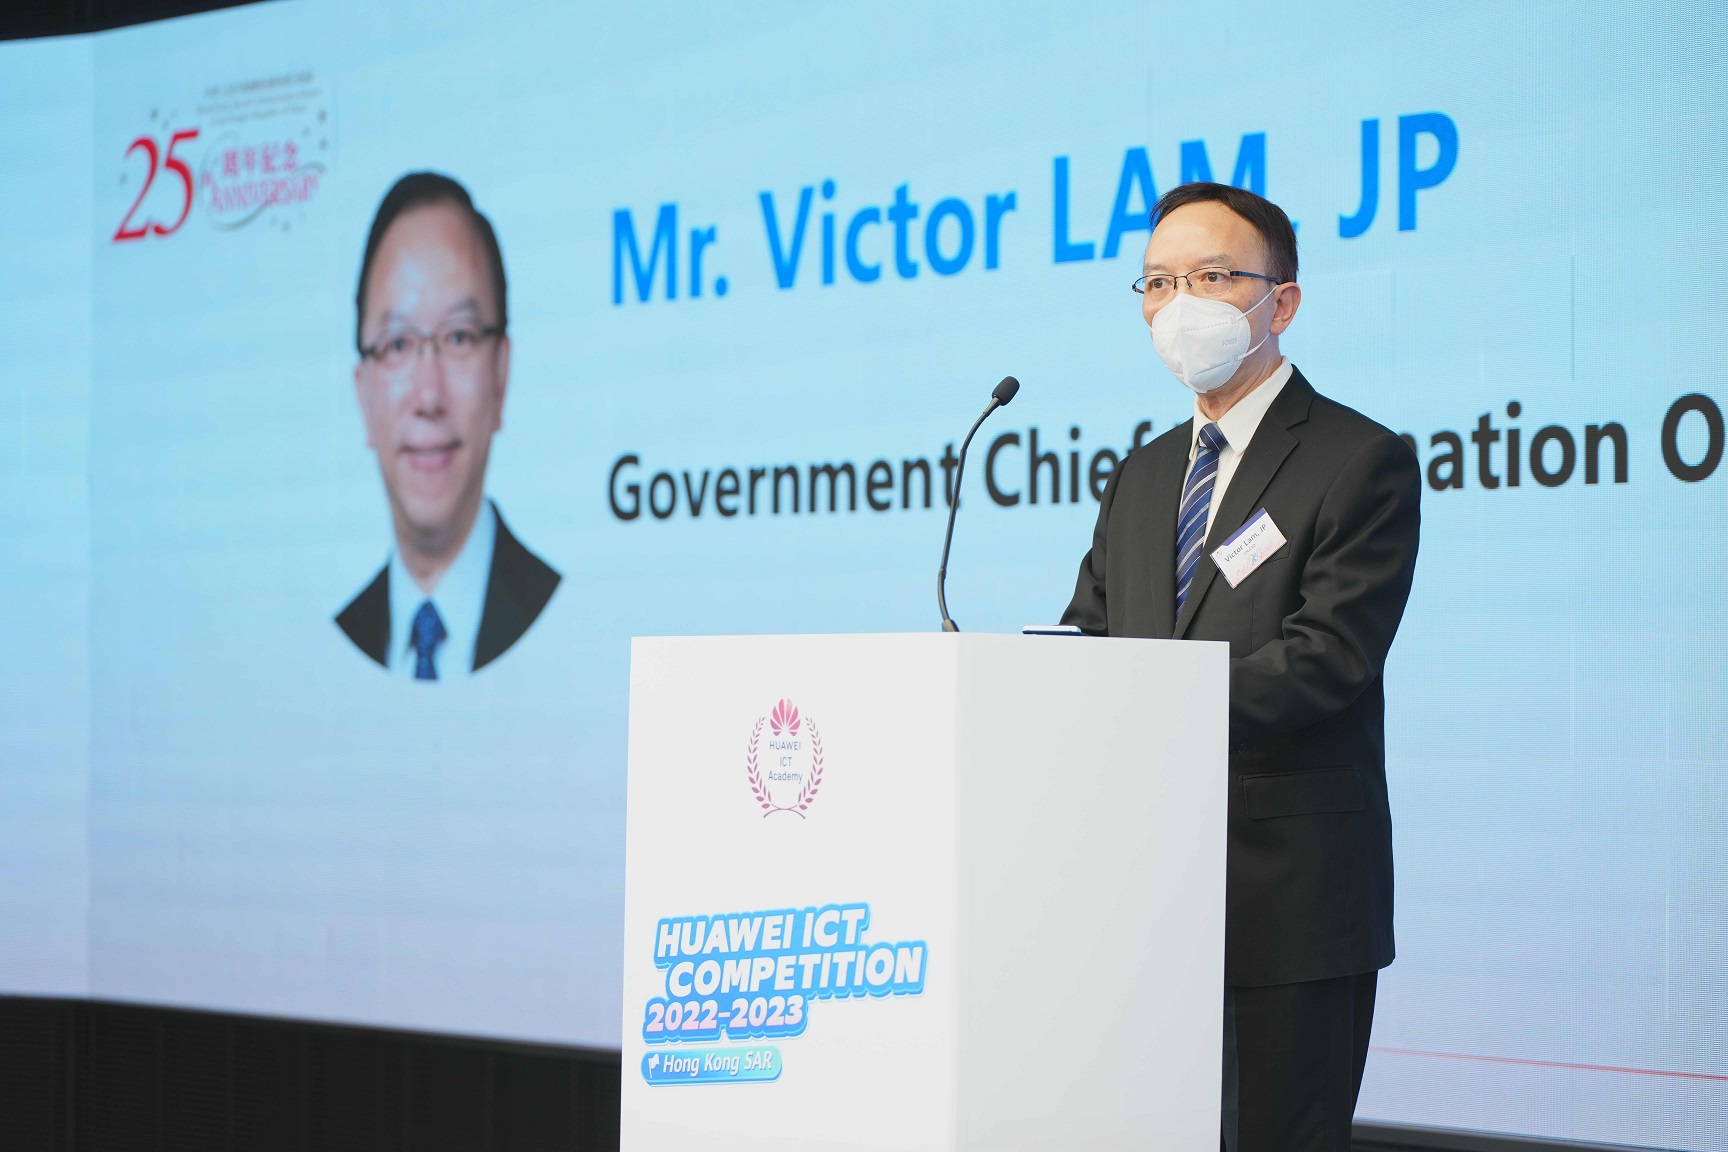 Mr Victor Lam, Government Chief Information Officer, delivered speech at the Award Ceremony of the Huawei ICT Competition 2022-2023 - Hong Kong SAR.